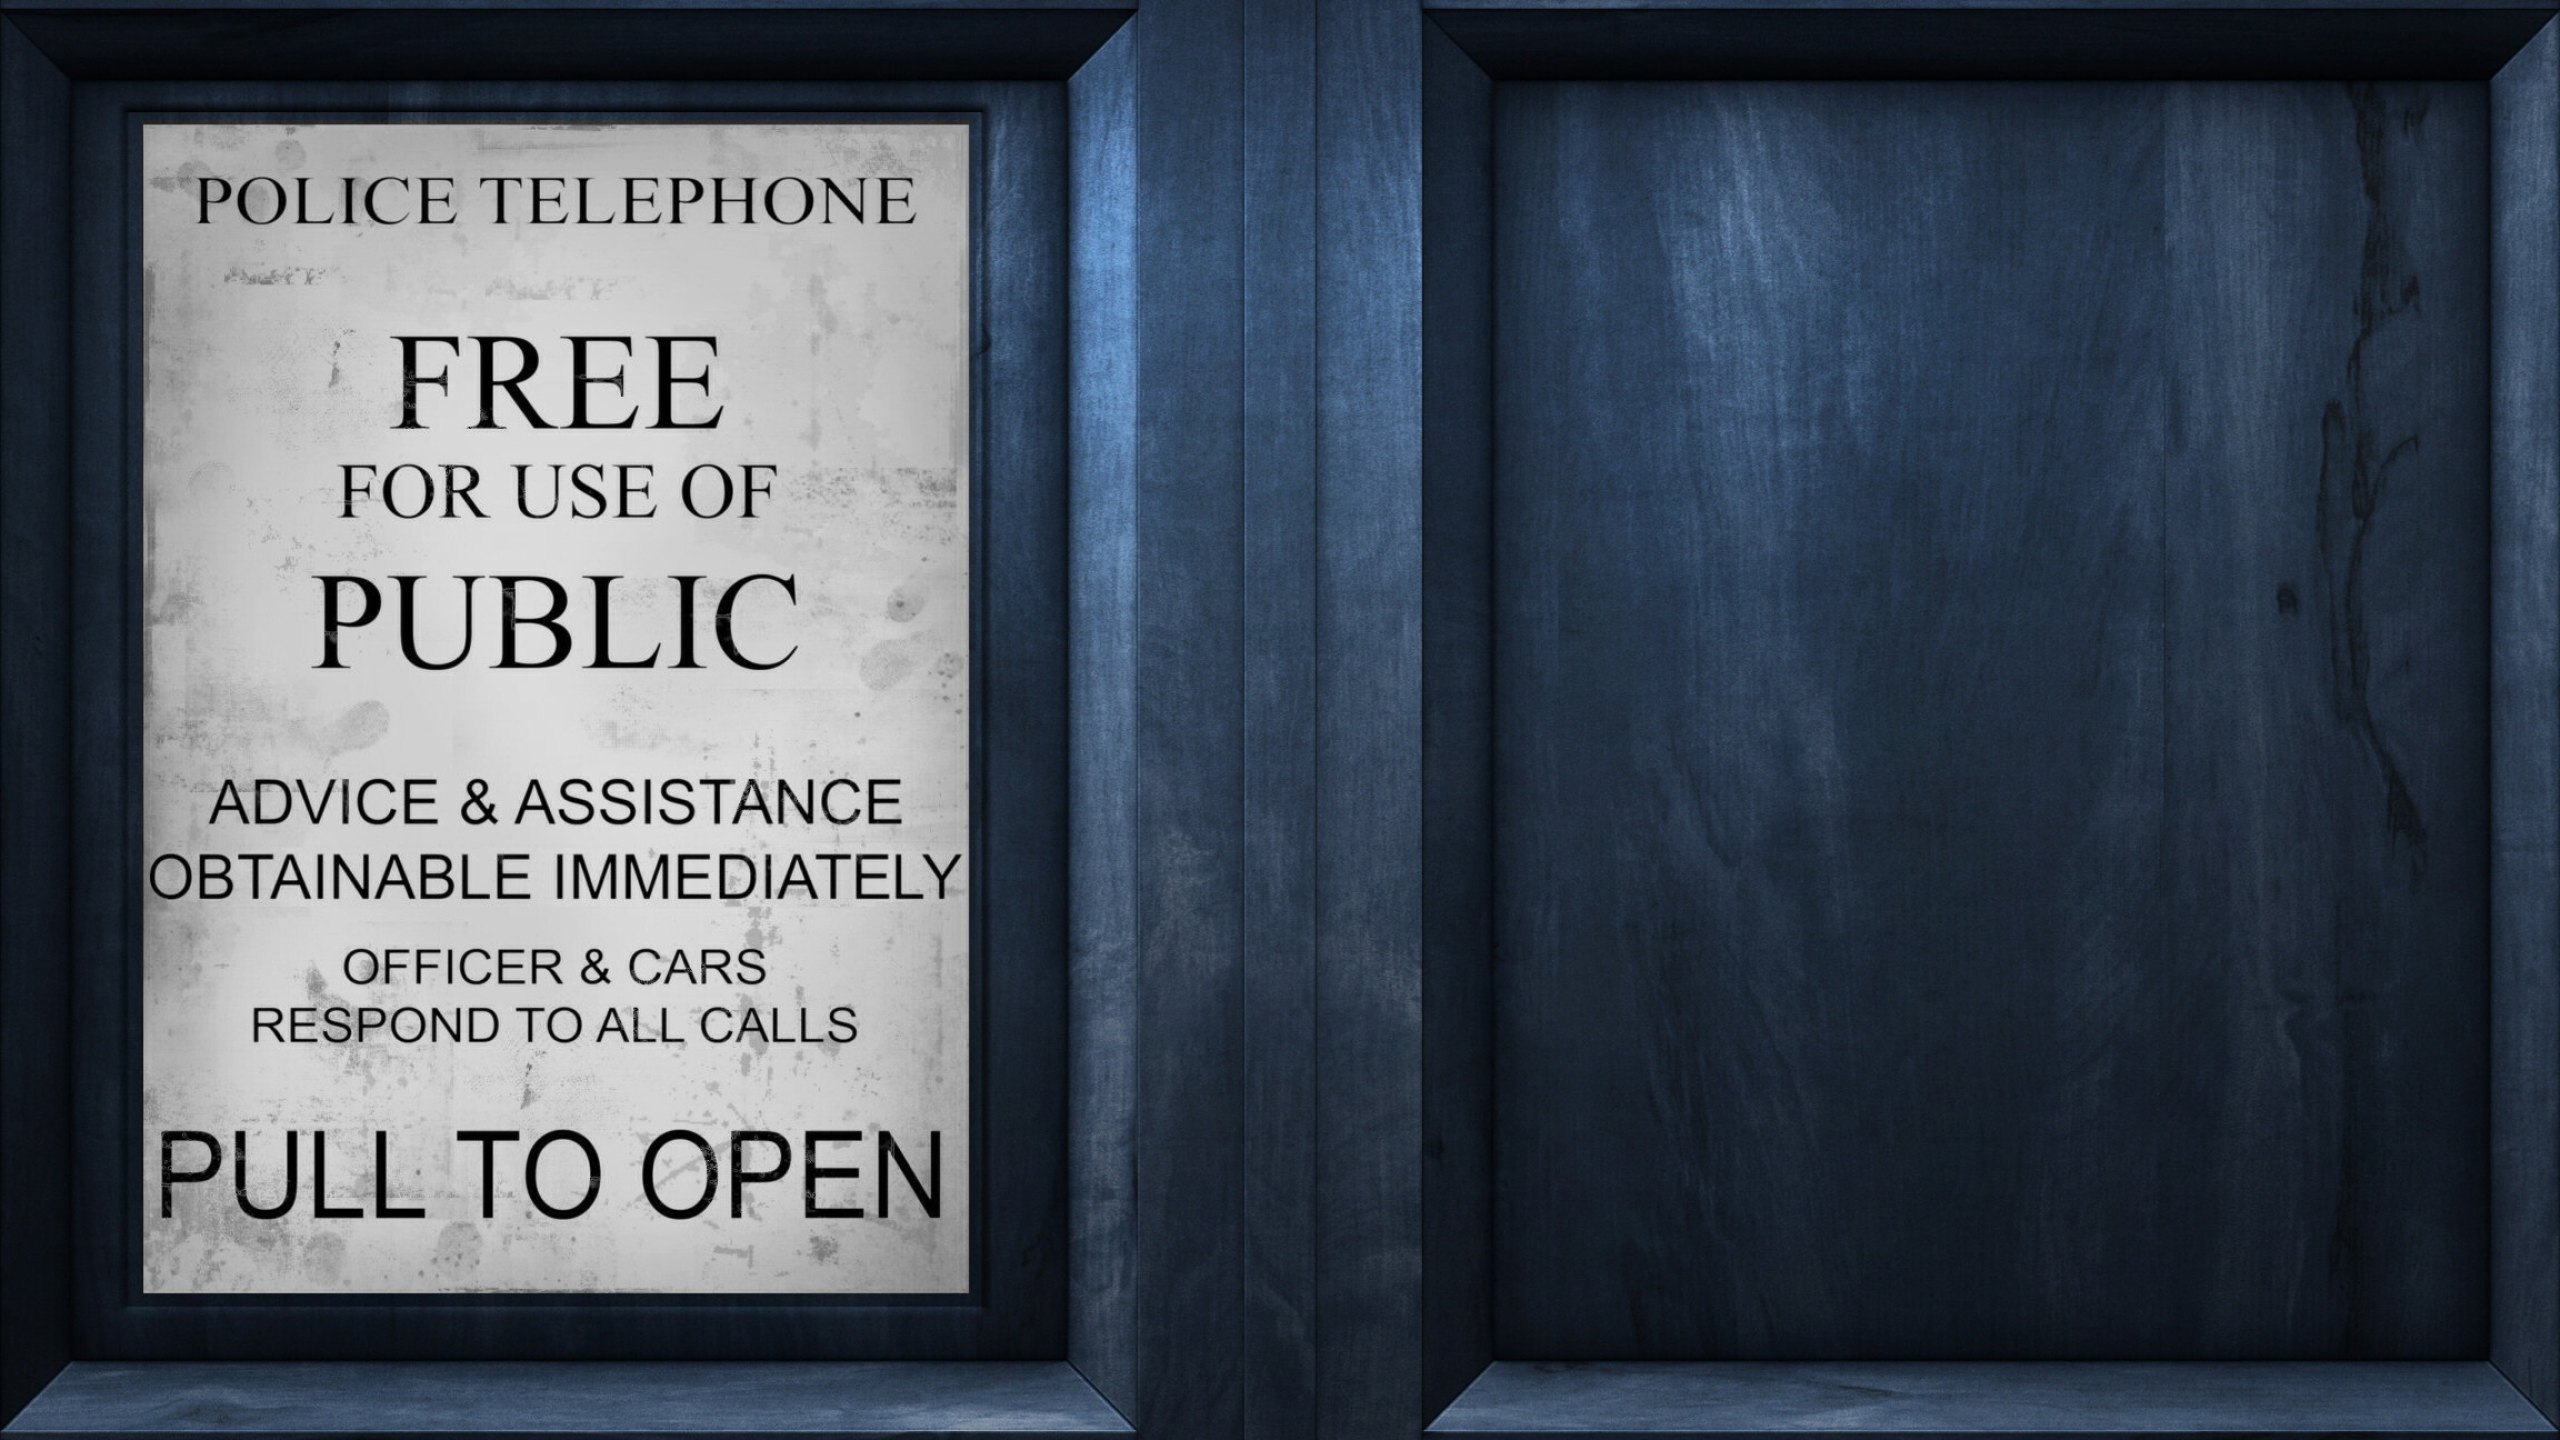 Doctor Who: Tardis sign, The primary space-time vehicle used by the Time Lords of Gallifrey allowing them to travel throughout the universe. 2560x1440 HD Wallpaper.